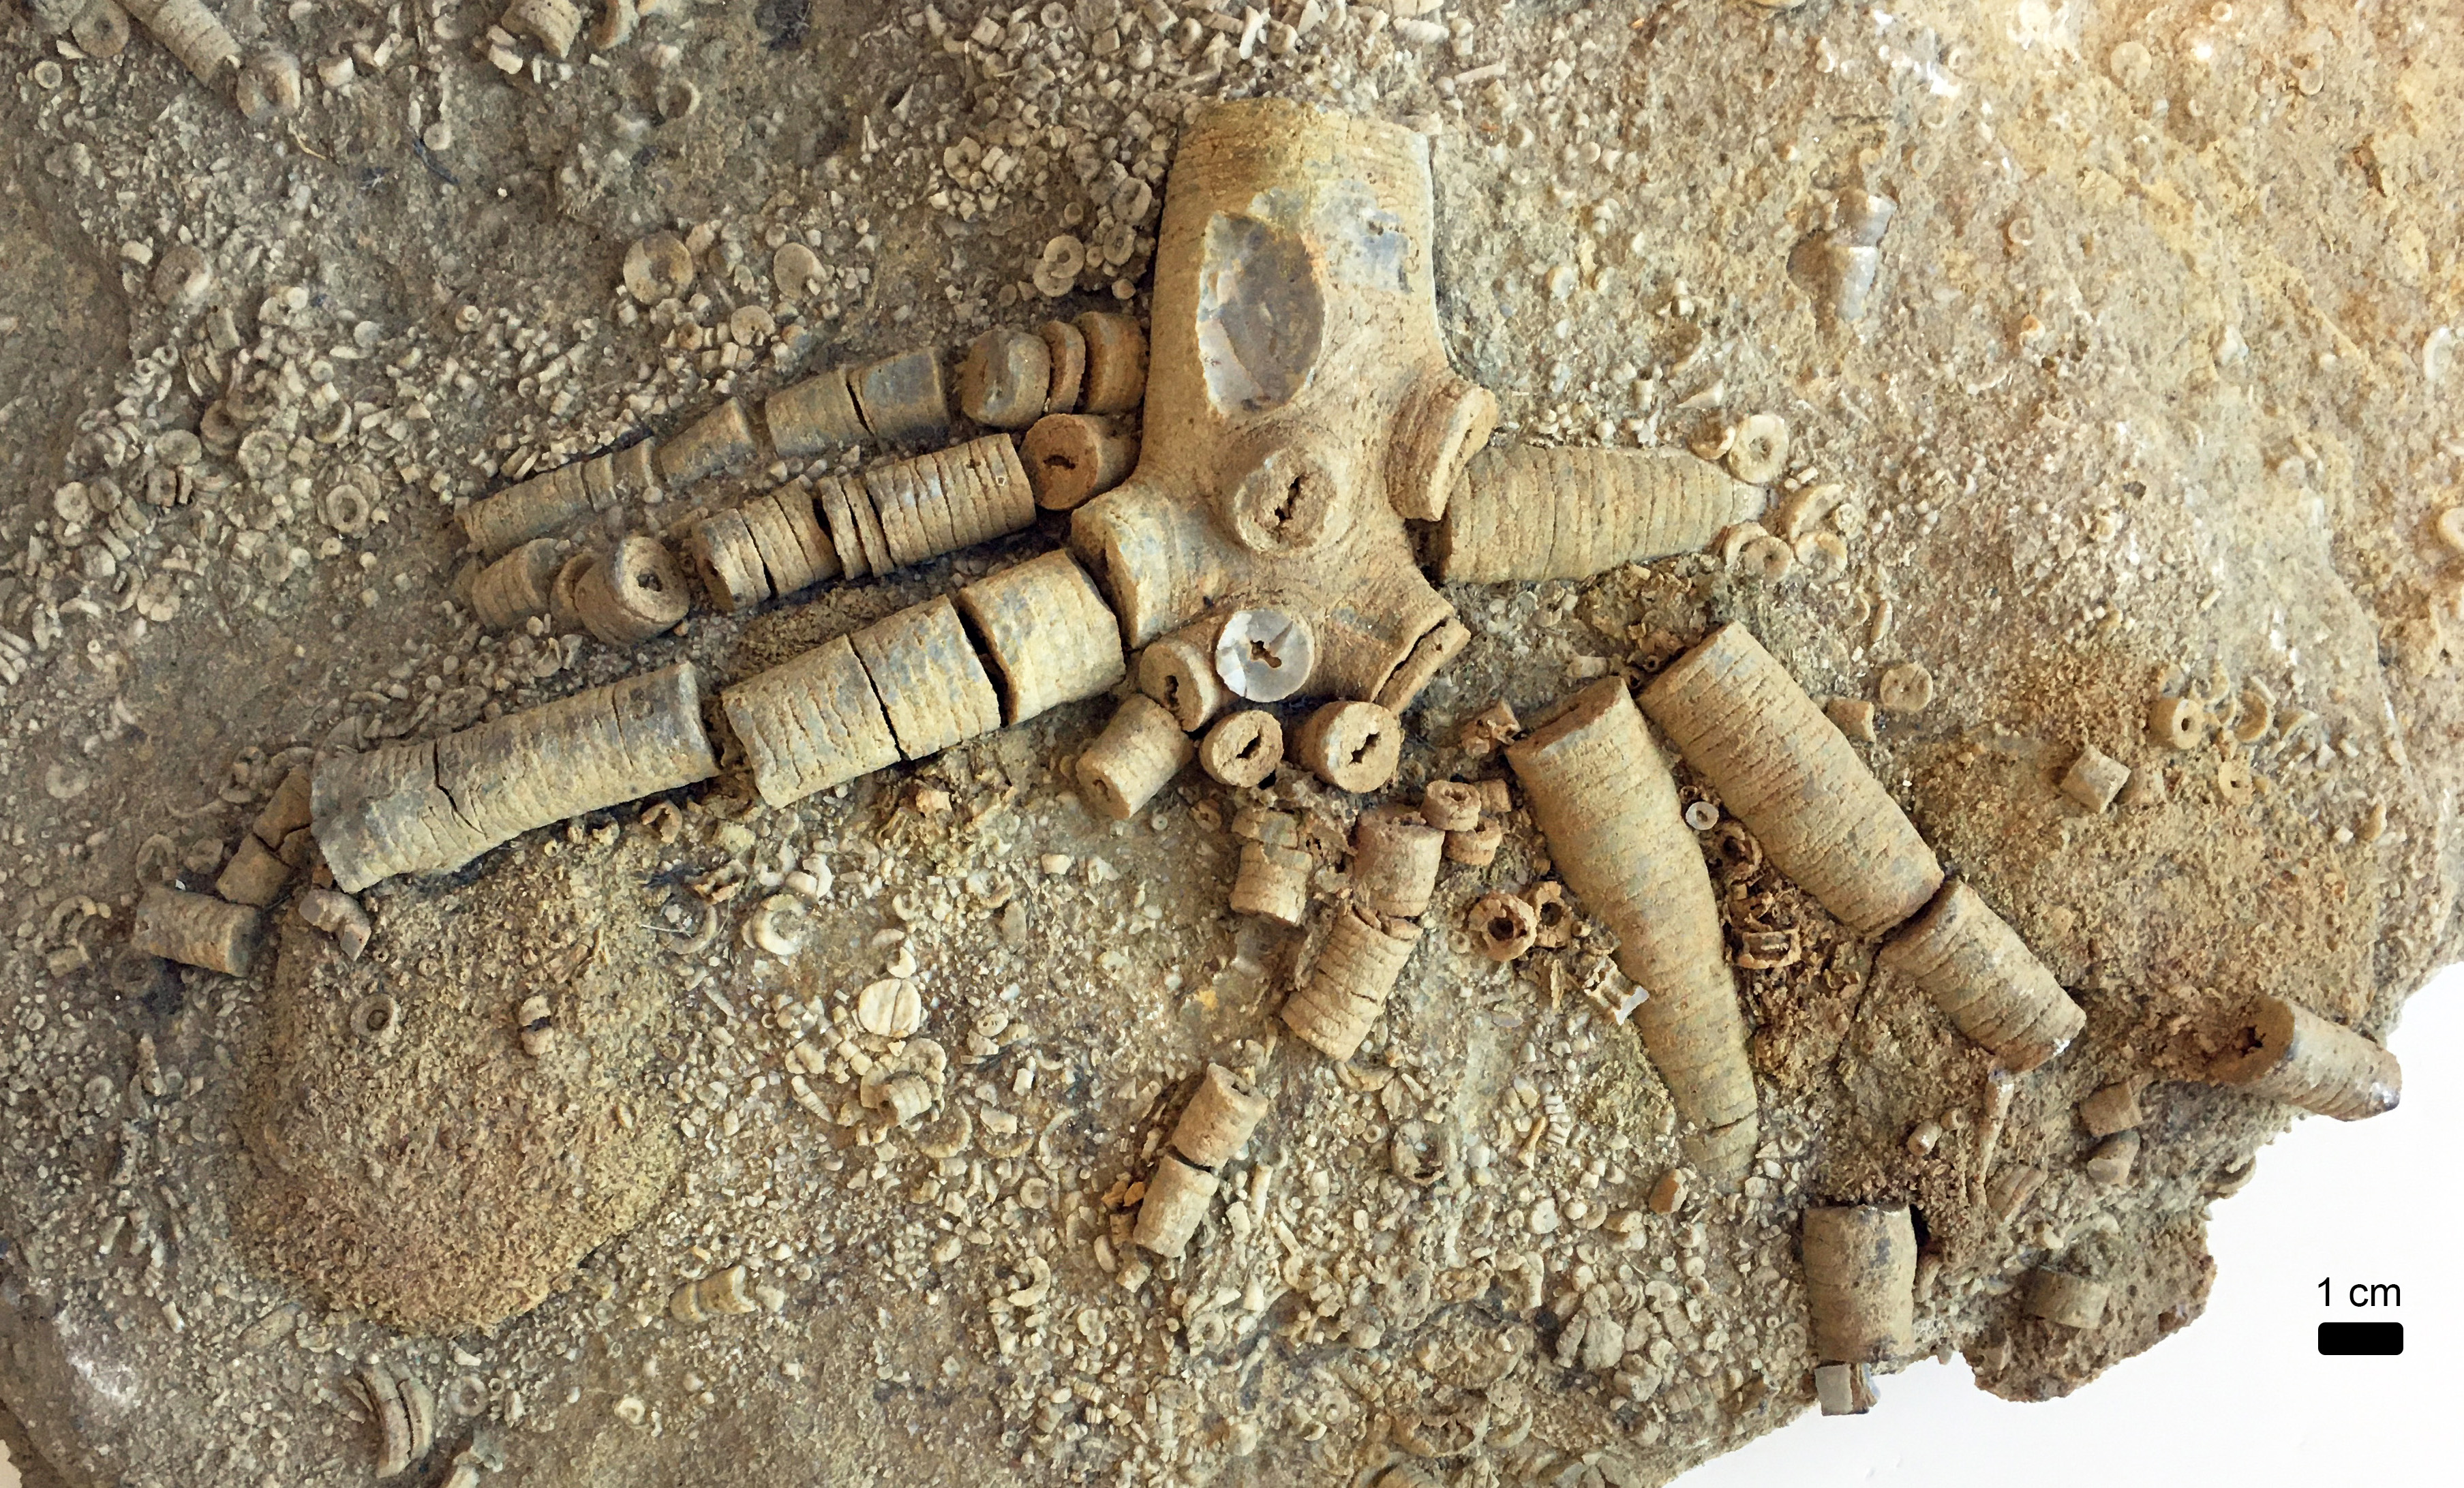 Fossil of the month: Crinoid Holdfasts